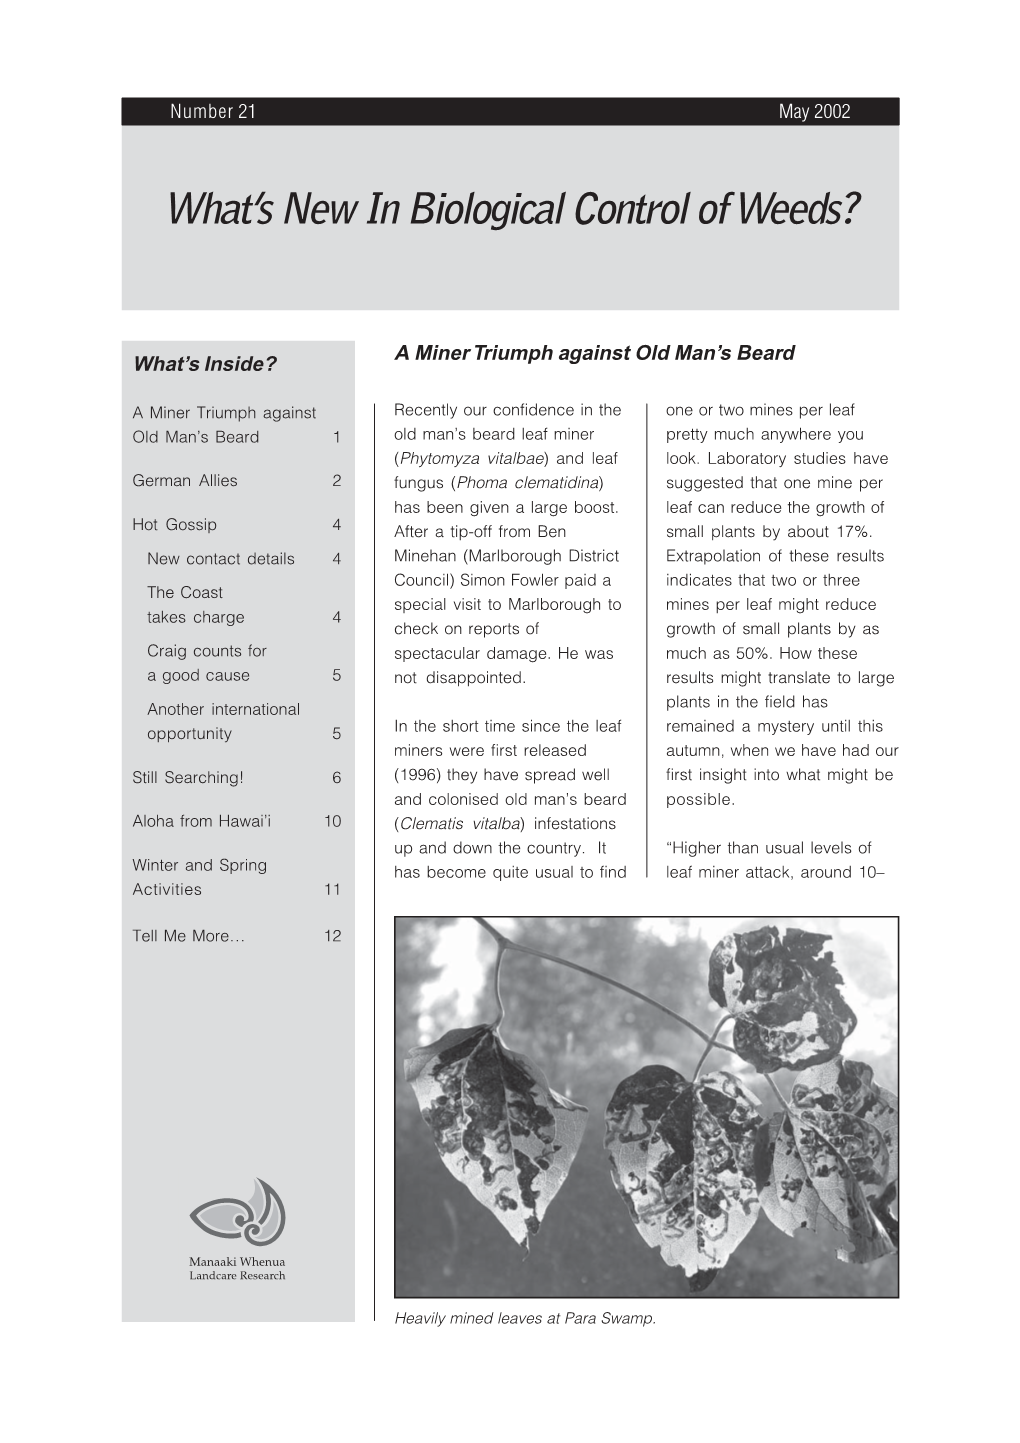 What's New in the Biological Control of Weeds, Issue